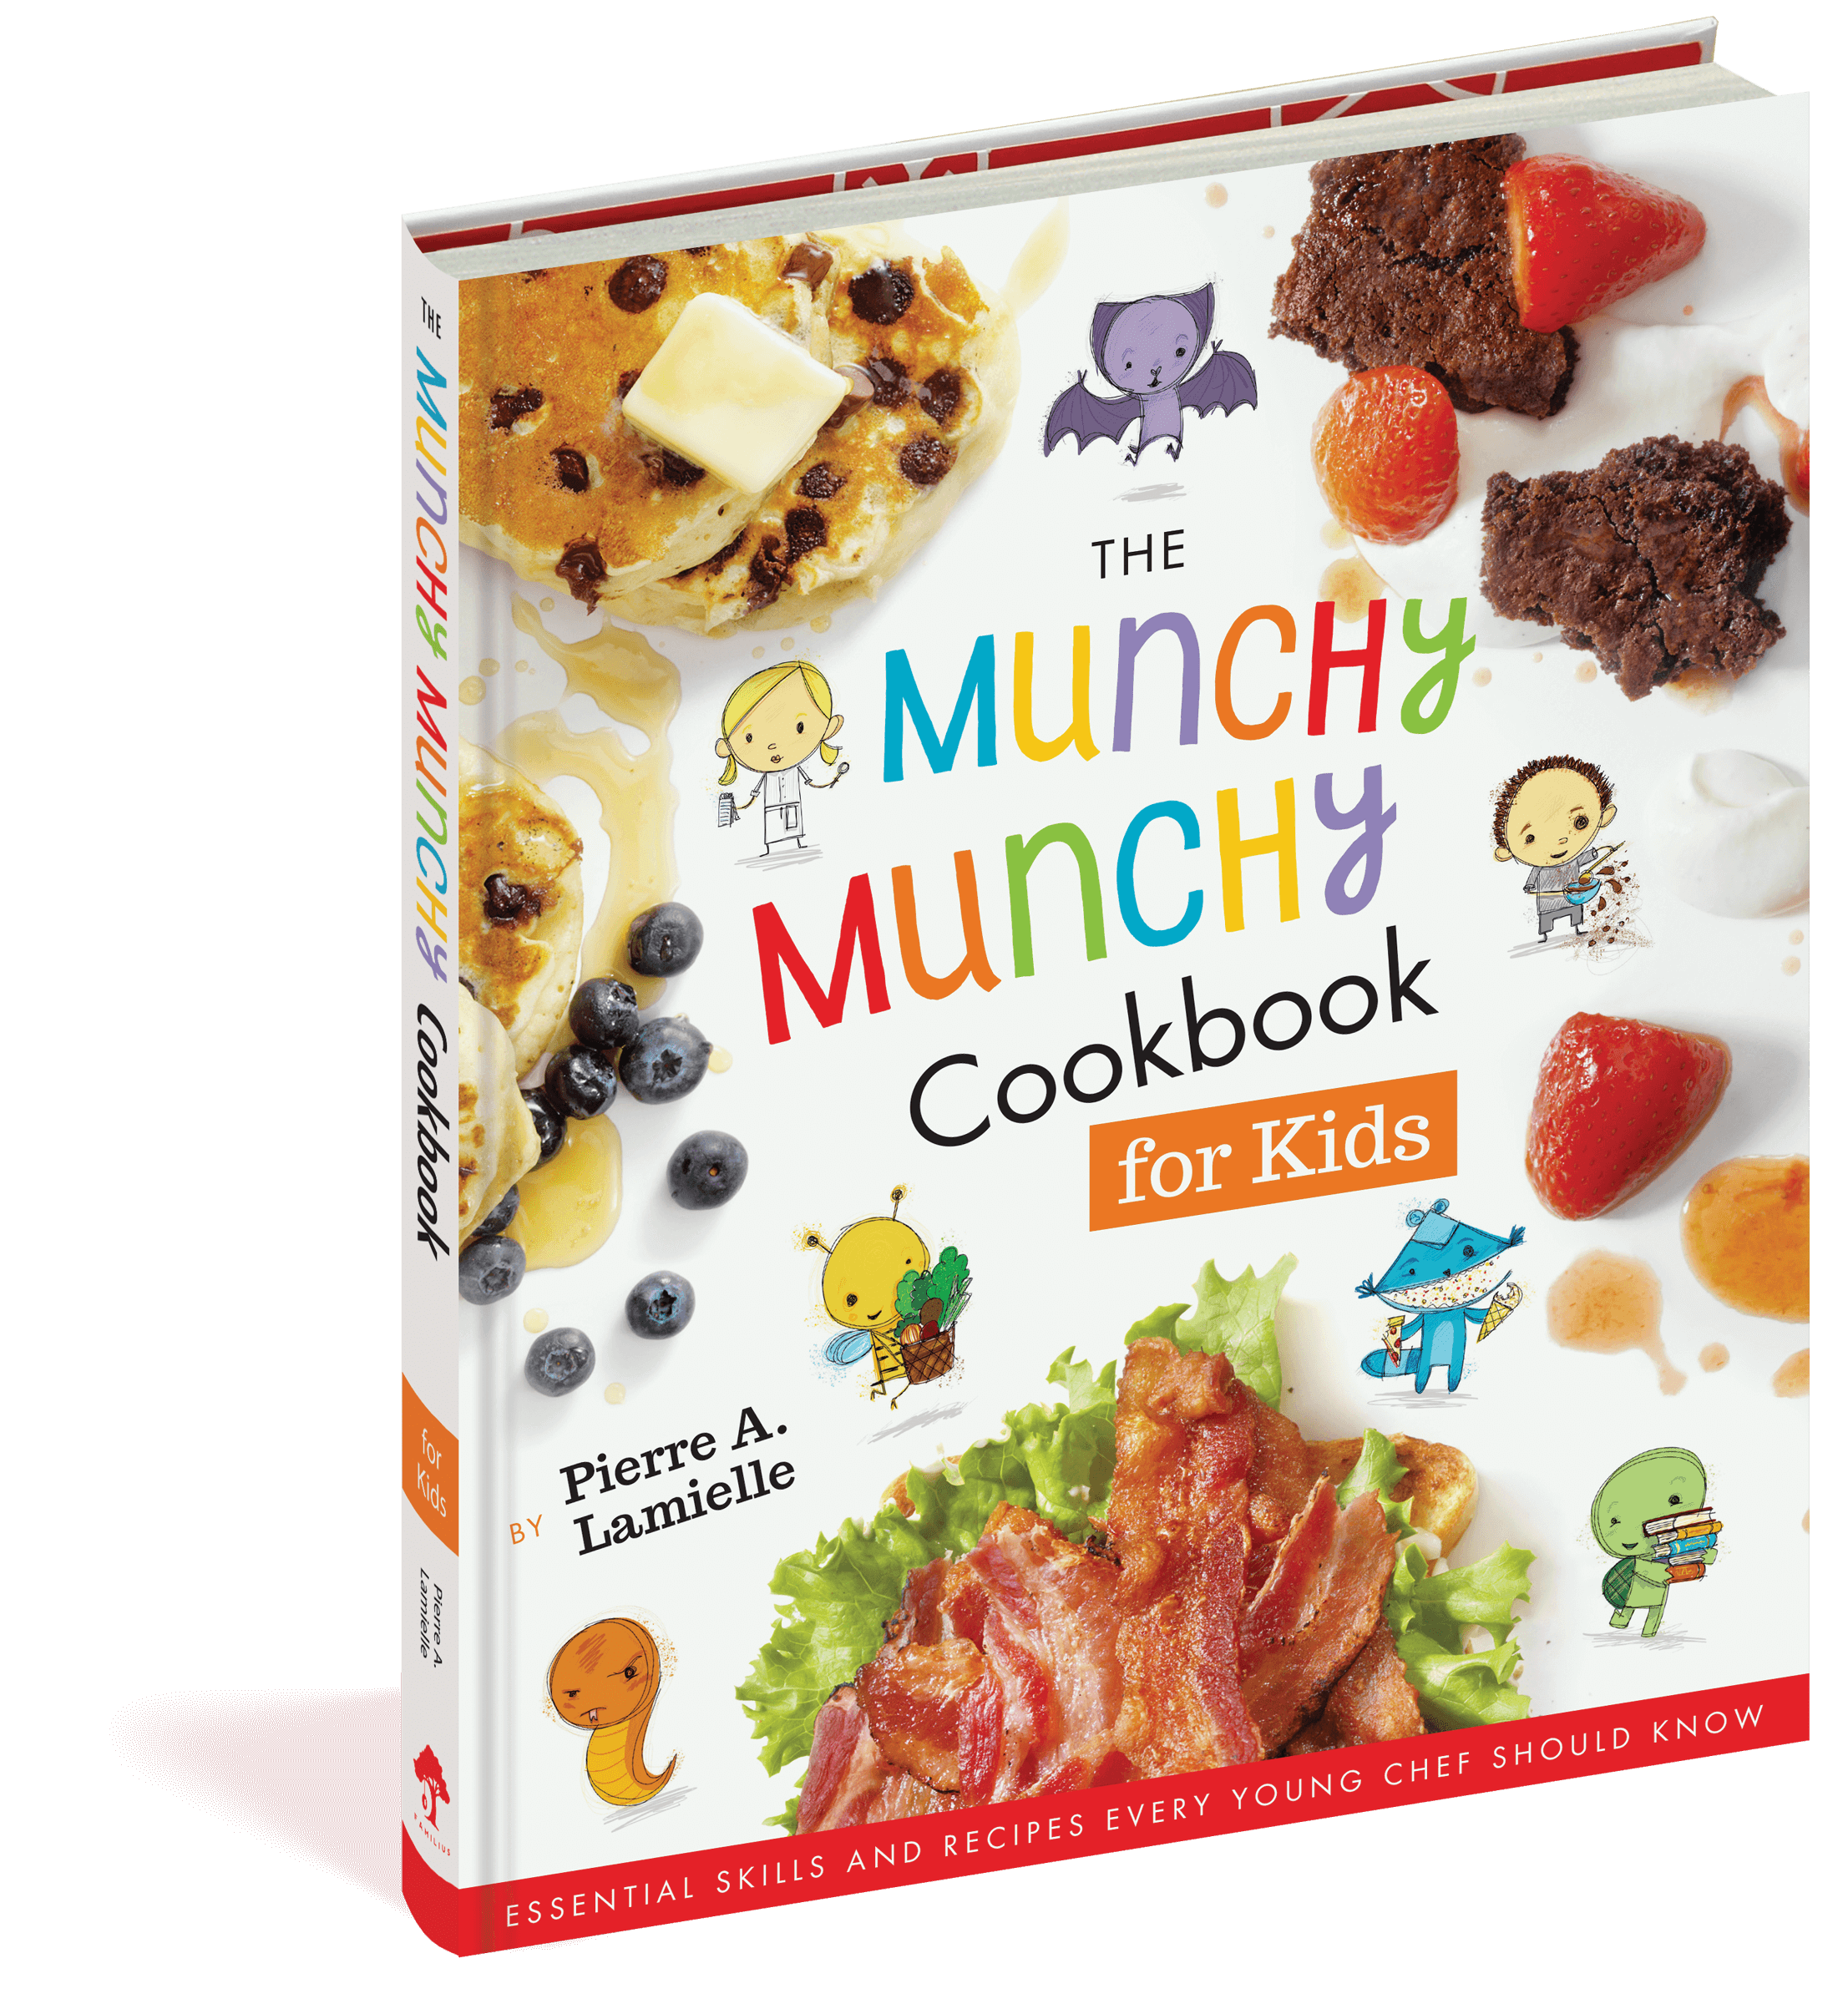 The cover of the cookbook The Munchy Munchy Cookbook for Kids.